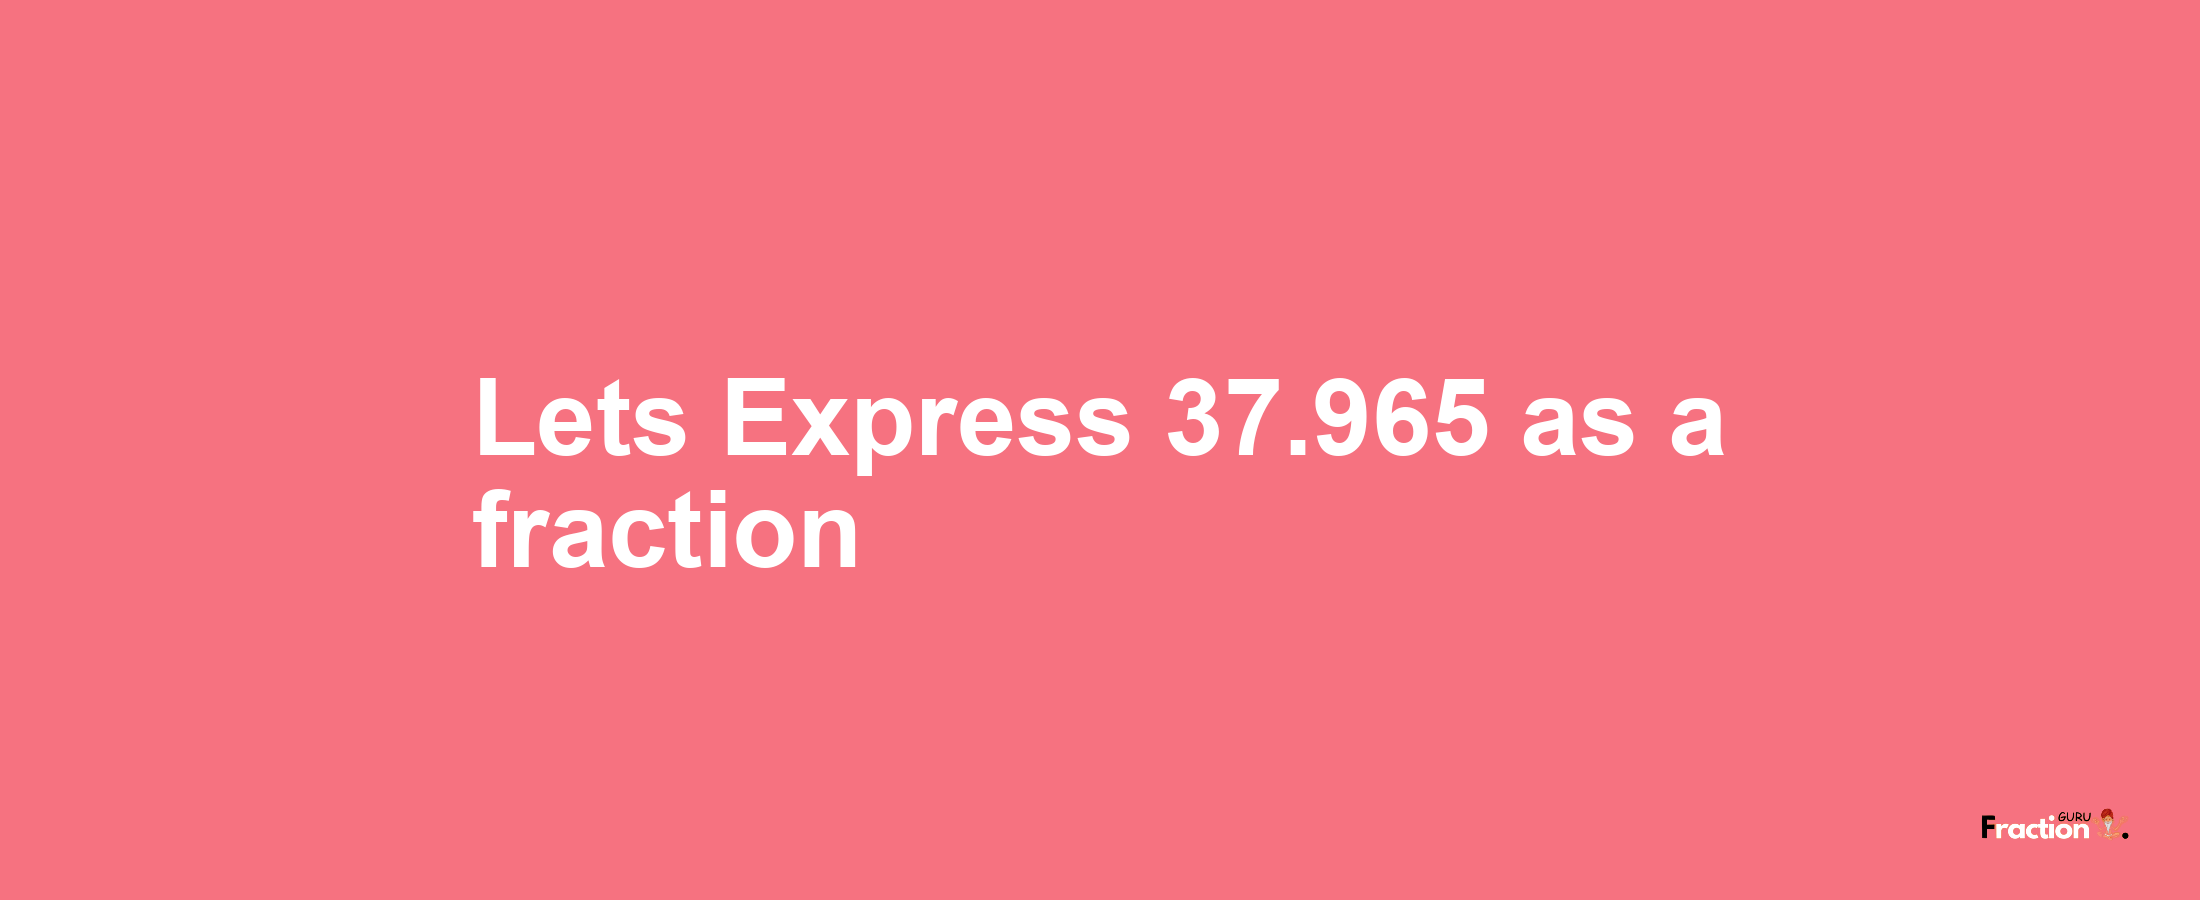 Lets Express 37.965 as afraction